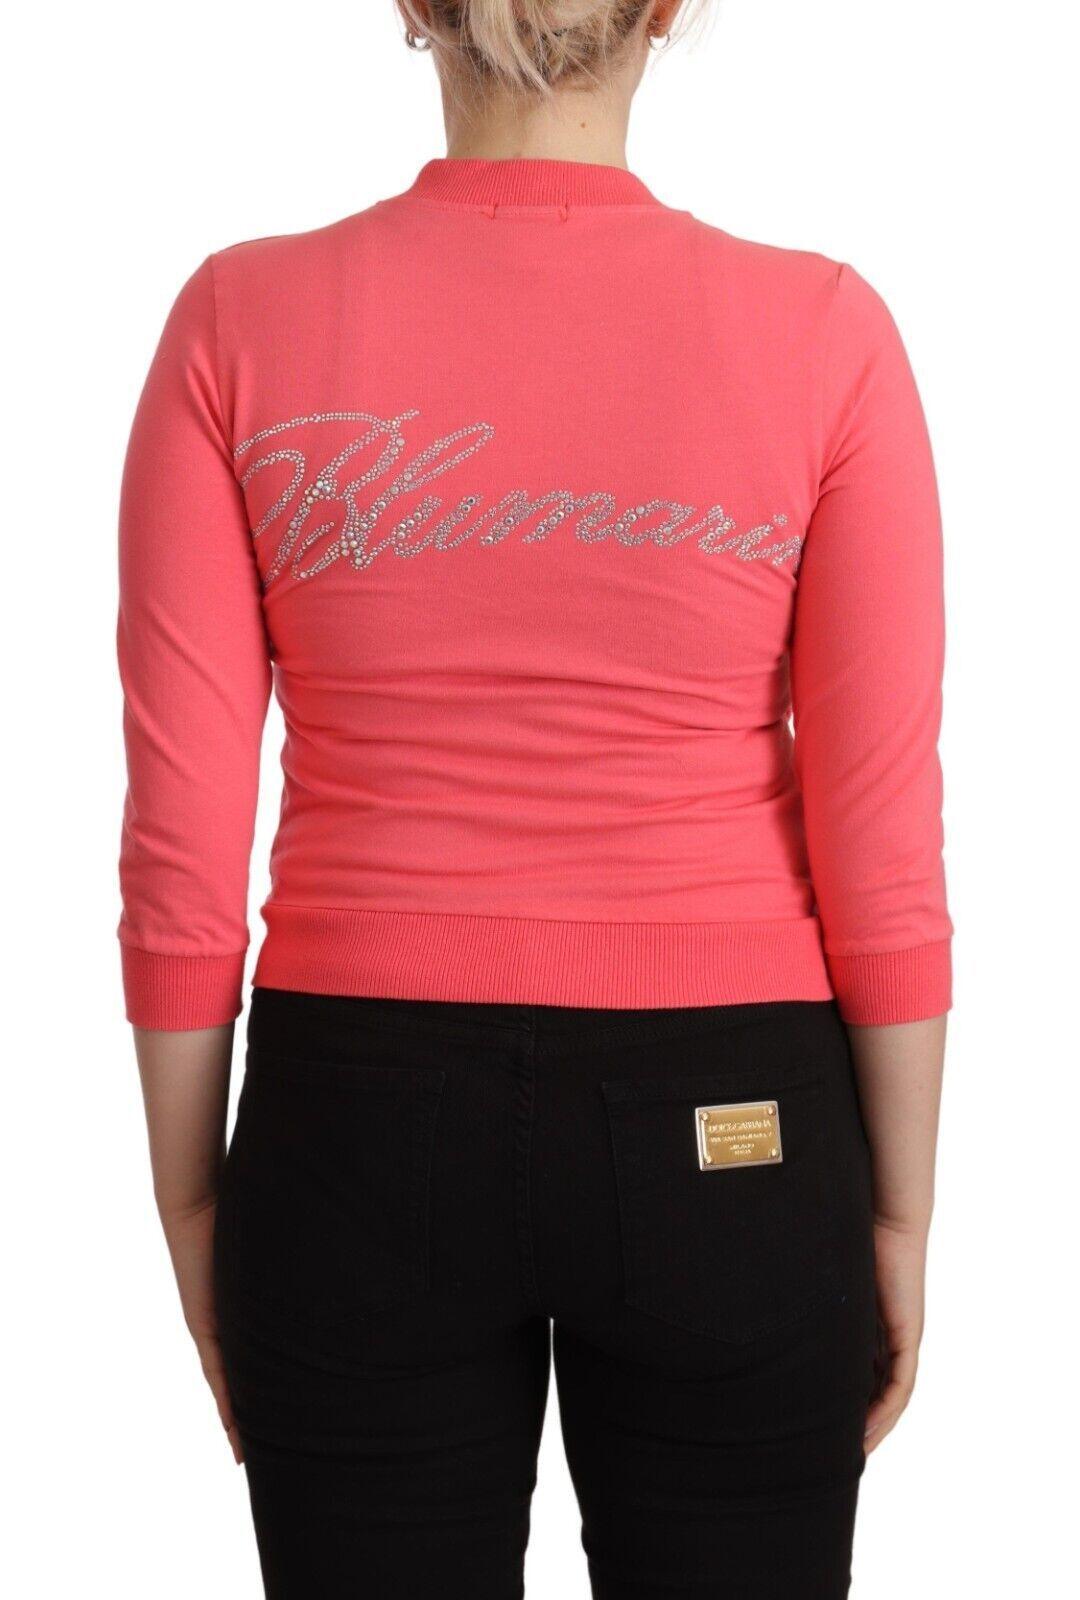 Blumarine Women's Pink 3/4 Sleeve Zip Embellished Sweater - Designed by Blumarine Available to Buy at a Discounted Price on Moon Behind The Hill Online Designer Discount Store